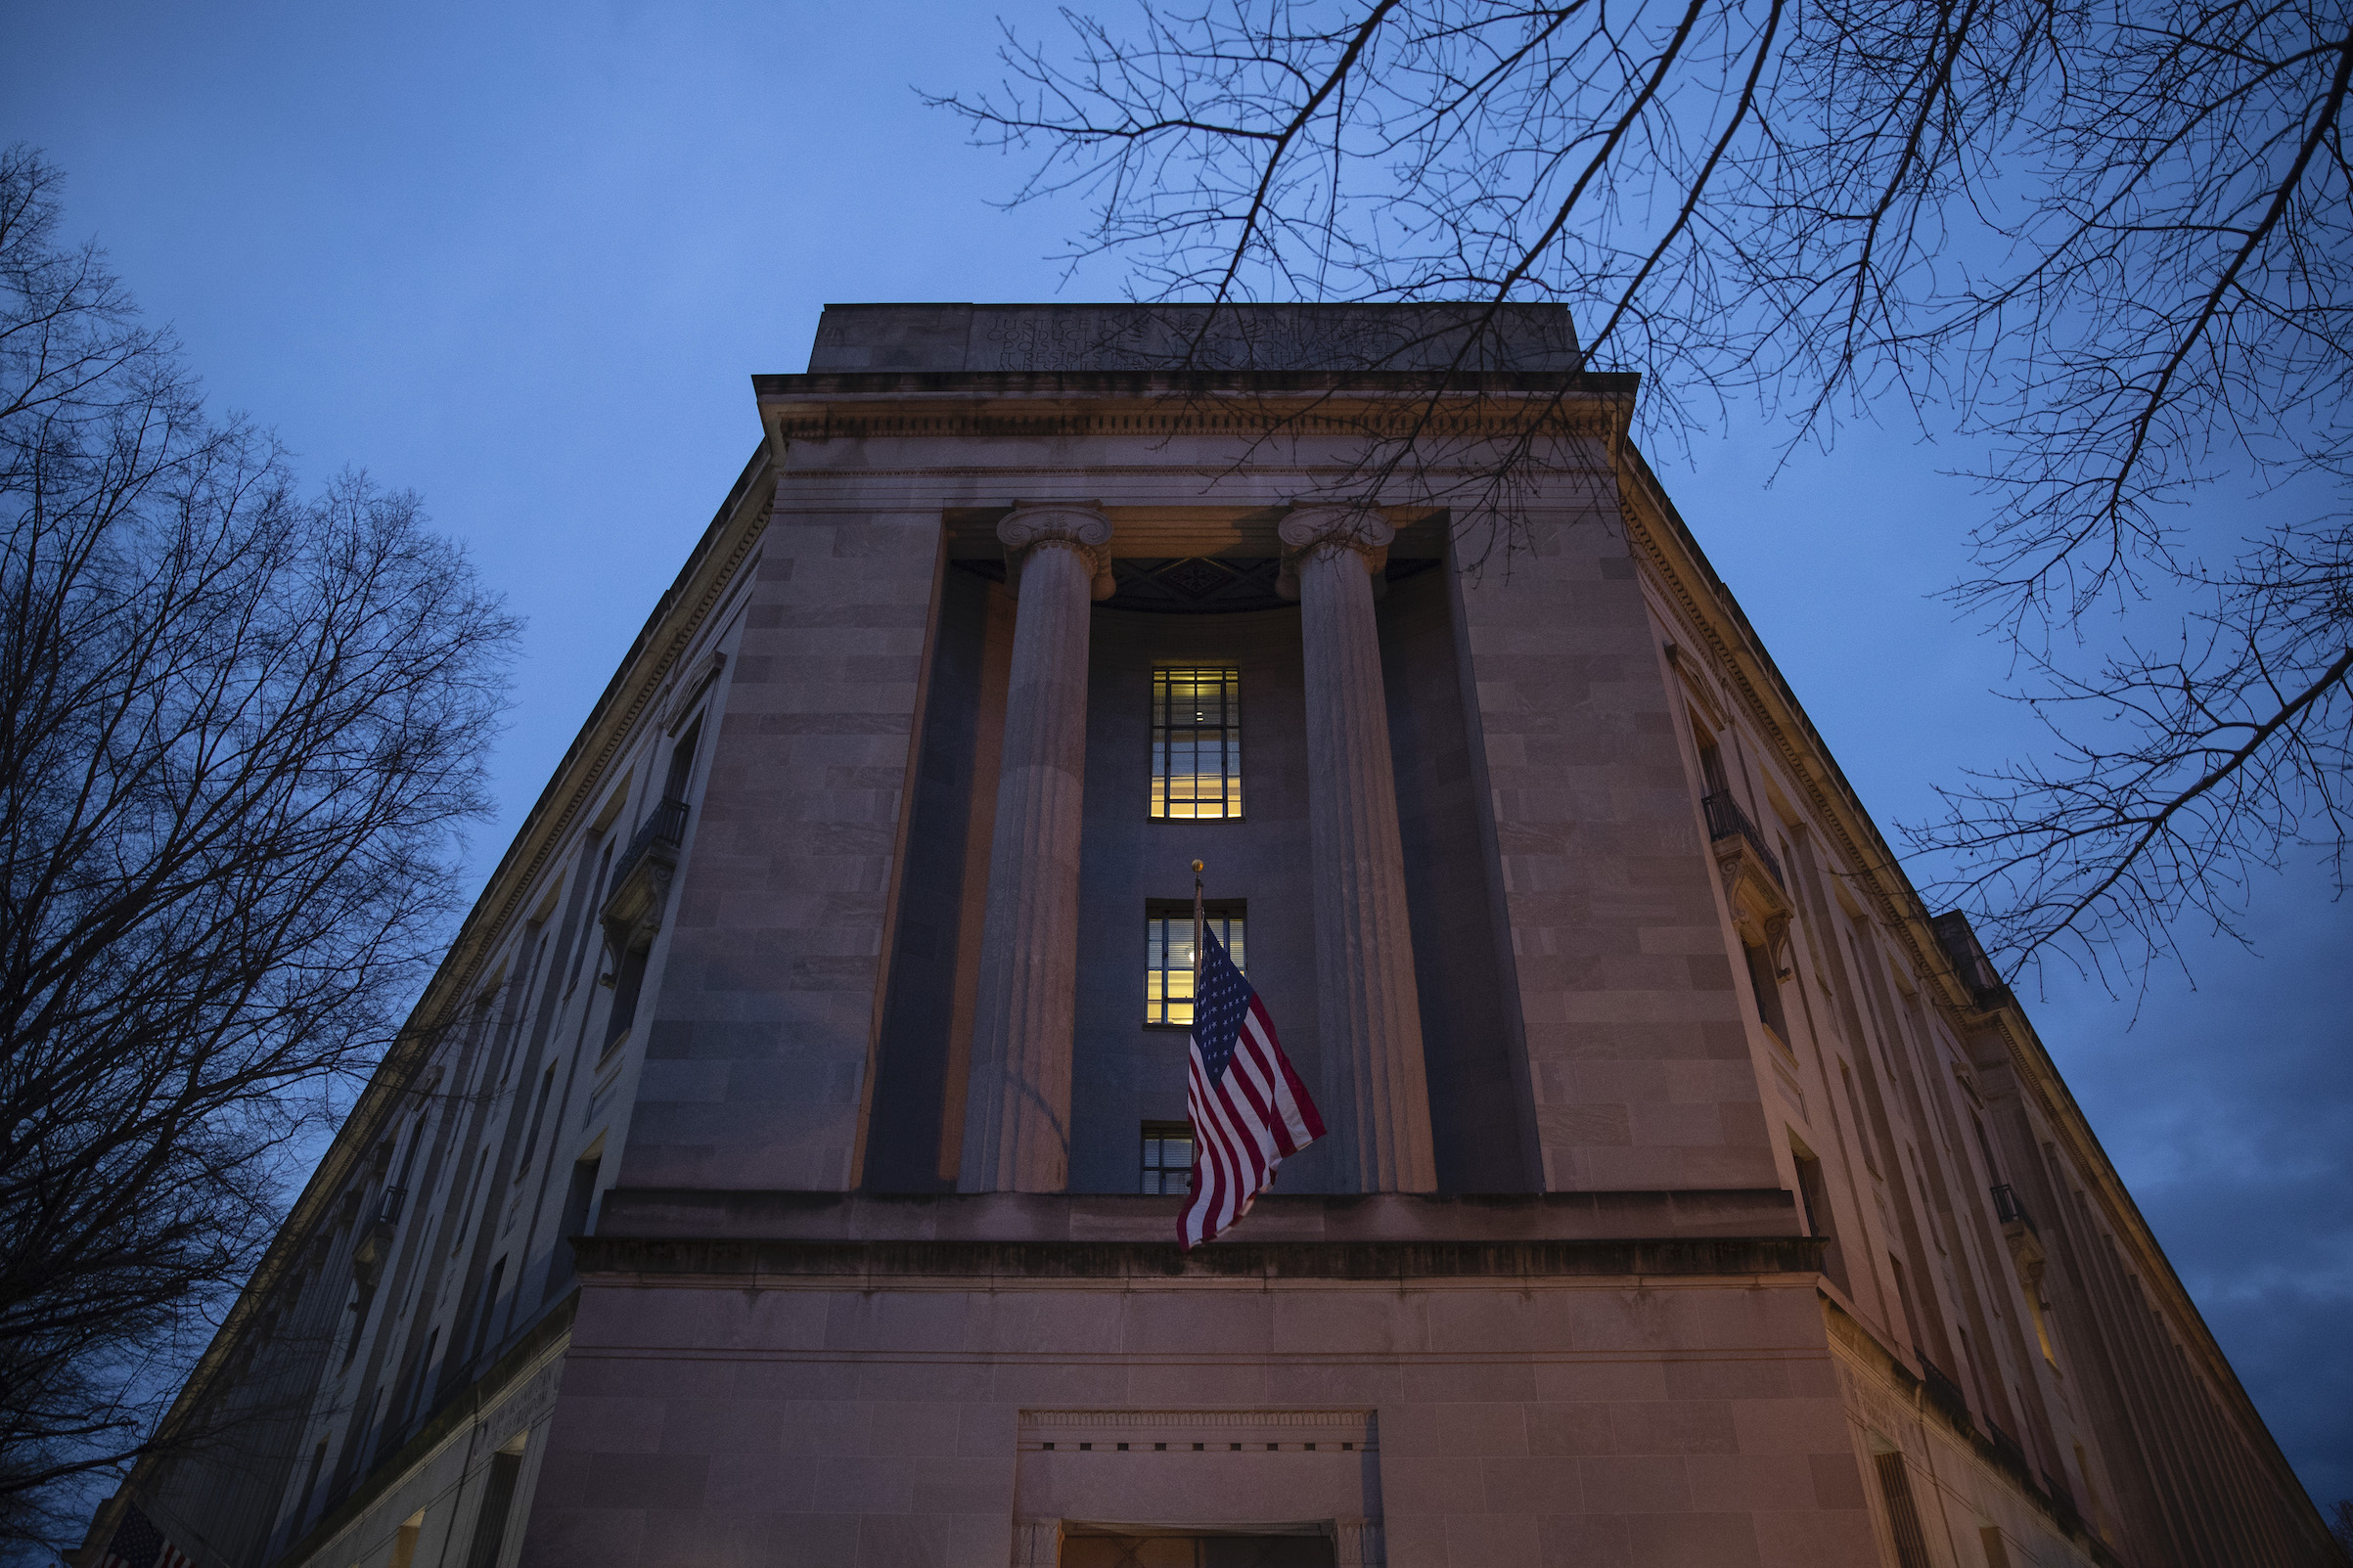 The Department of Justice stands in the early hours of Friday morning, March 22, 2019 in Washington, D.C. (Drew Angerer—Getty Images)